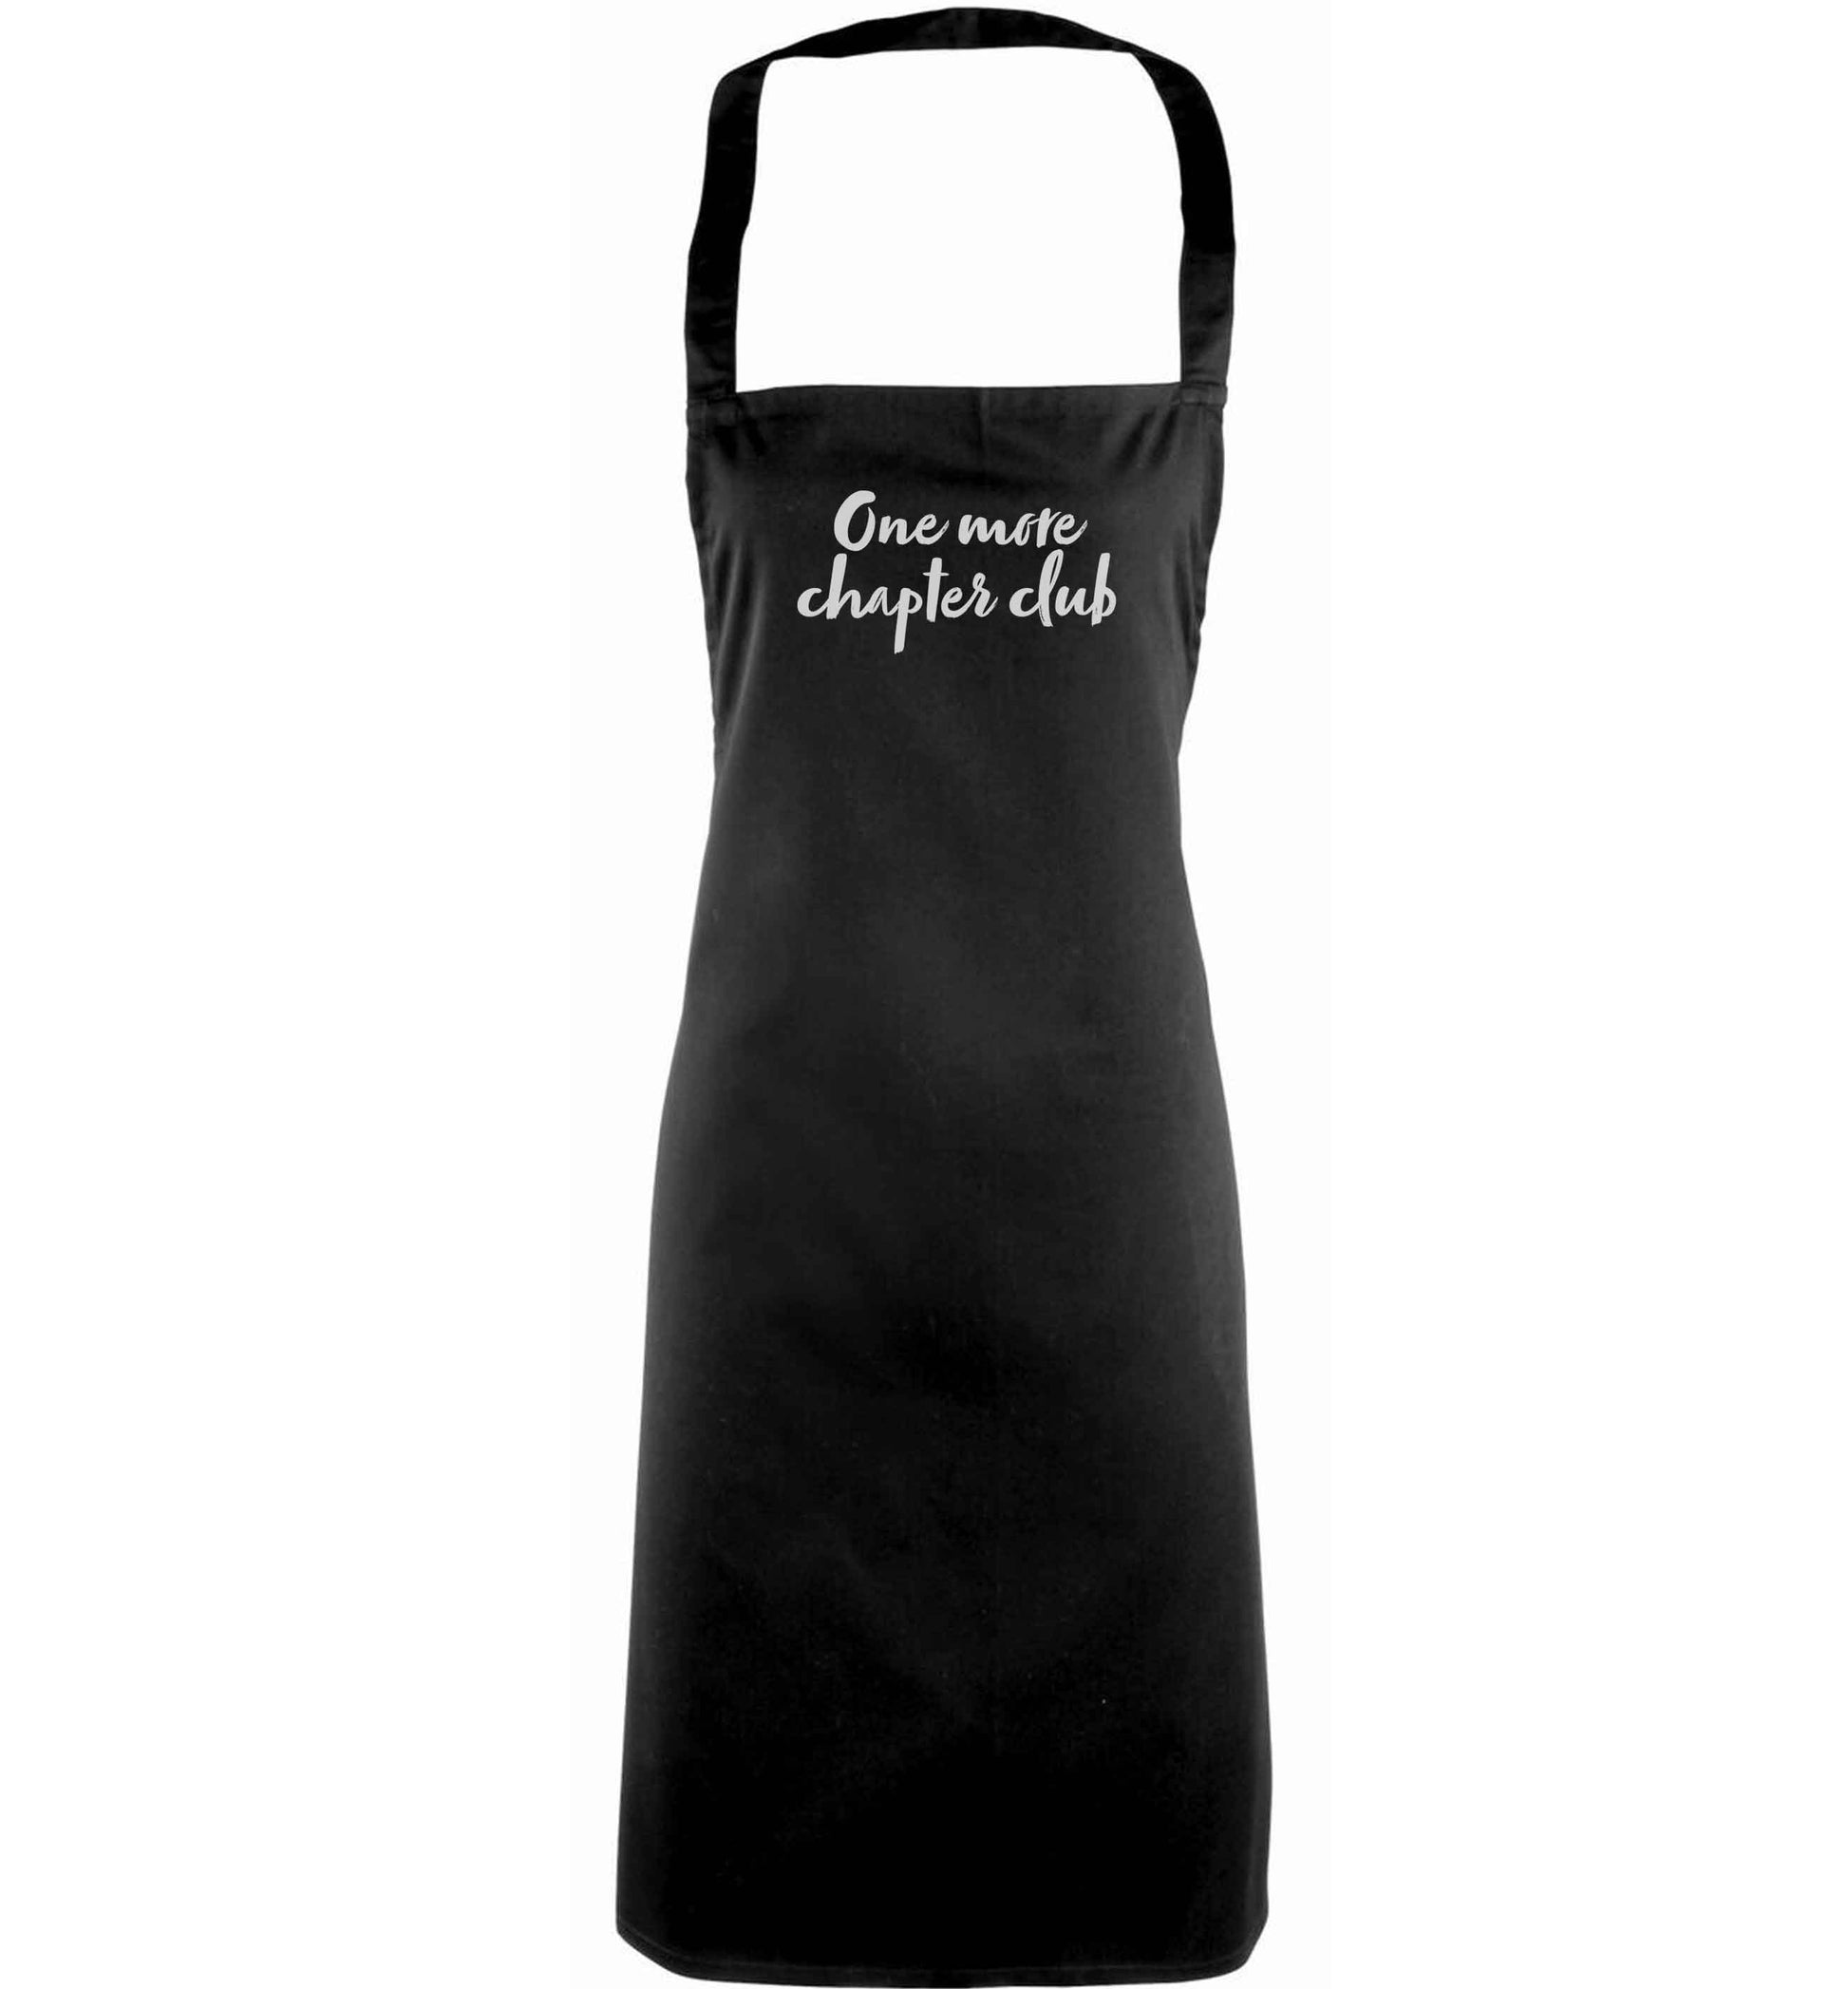 One more chapter club Kit adults black apron